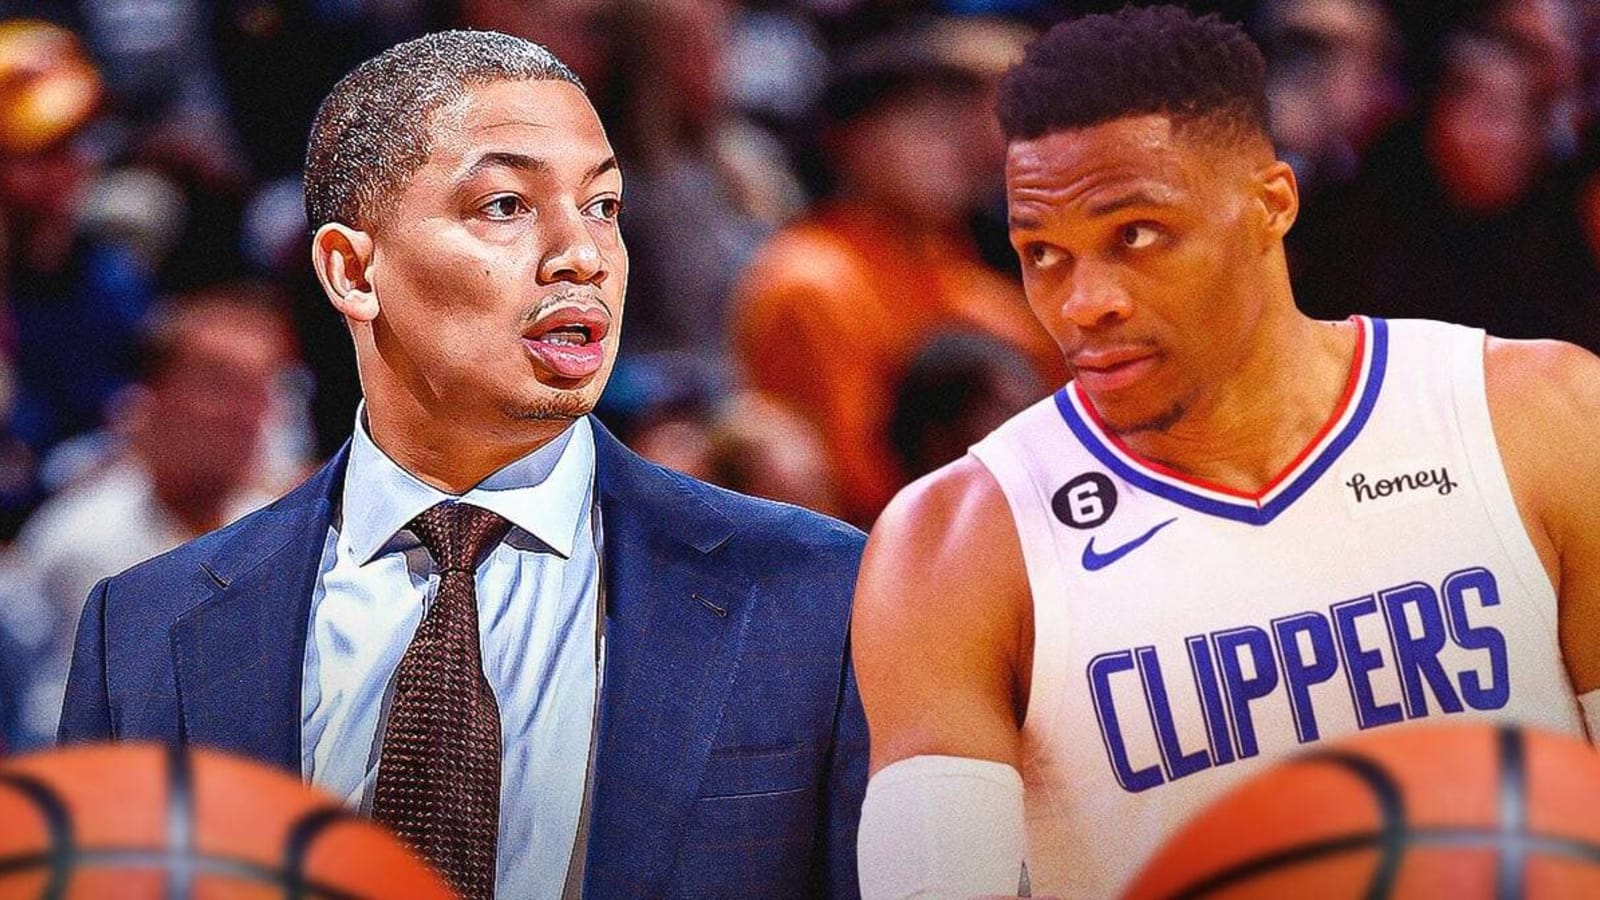 Clippers’ Tyronn Lue reacts to Russell Westbrook’s unfathomably bad struggles